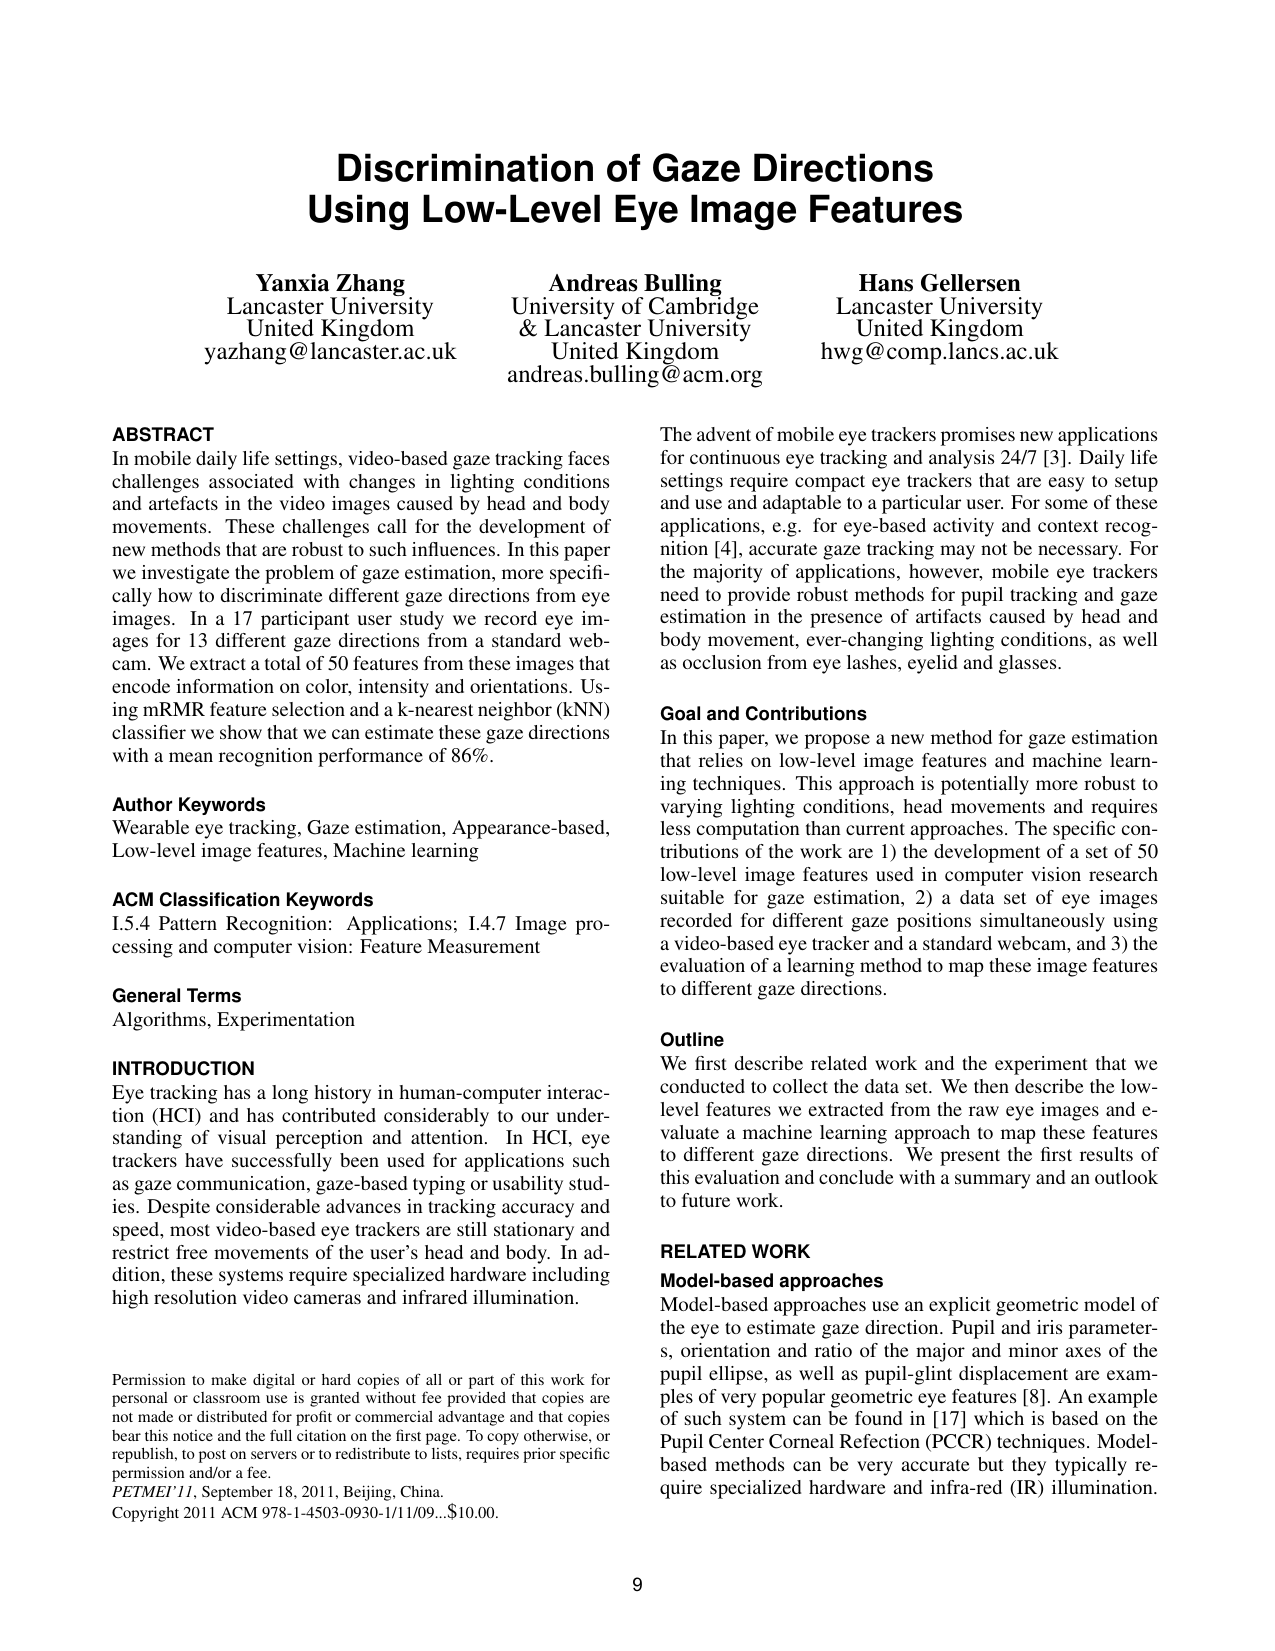 Discrimination of Gaze Directions Using Low-Level Eye Image Features